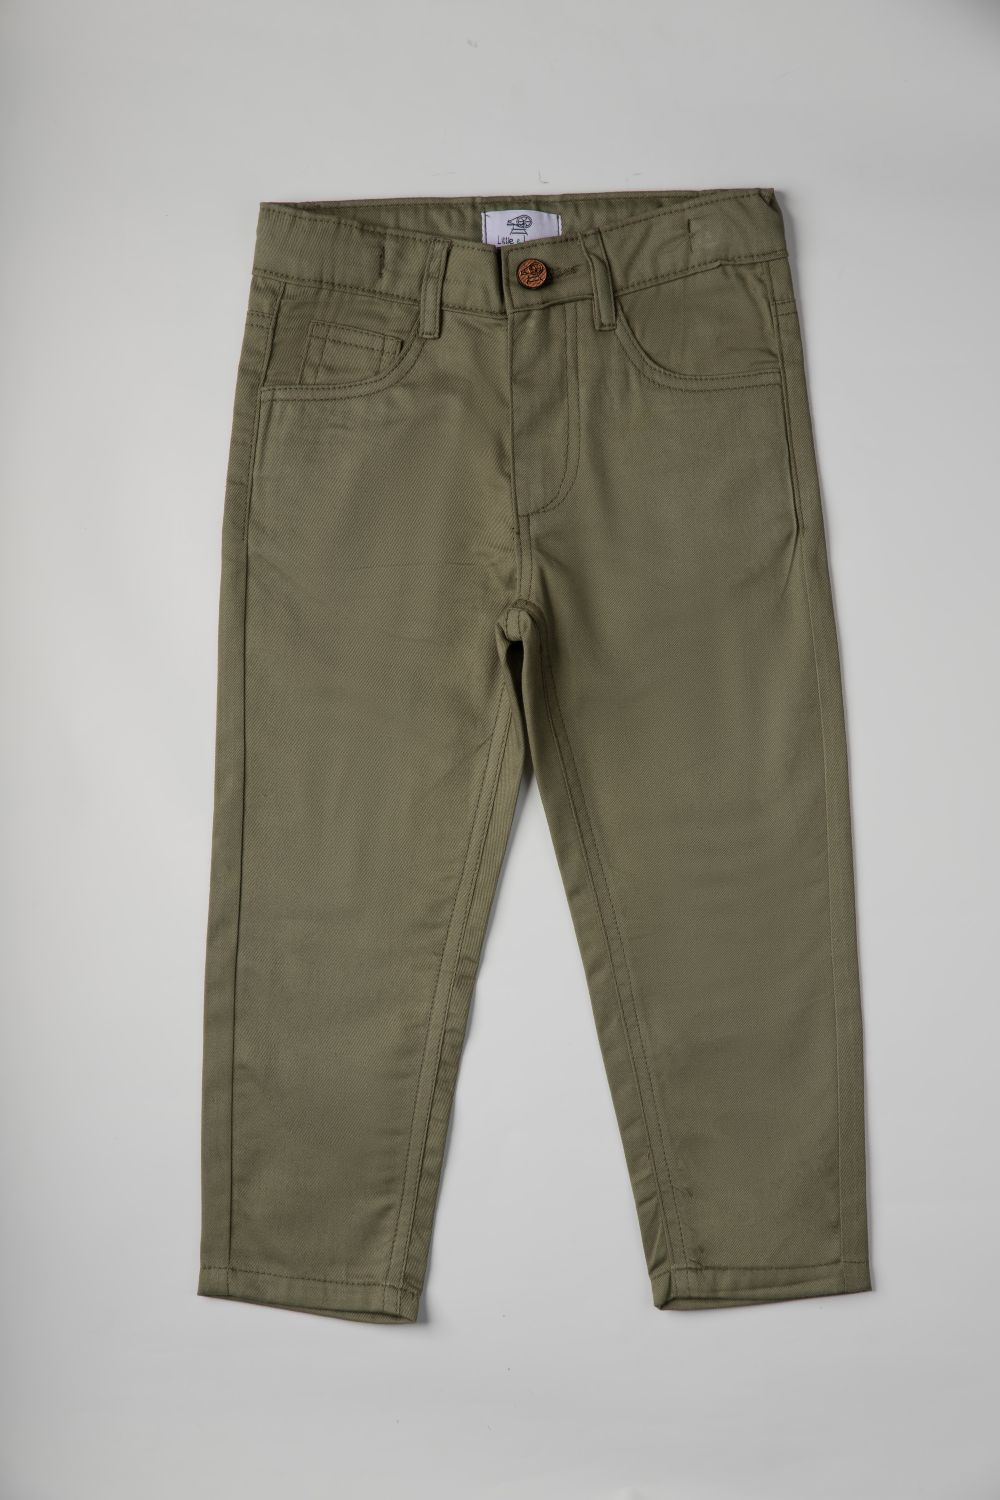 OLIVE GREEN PANT